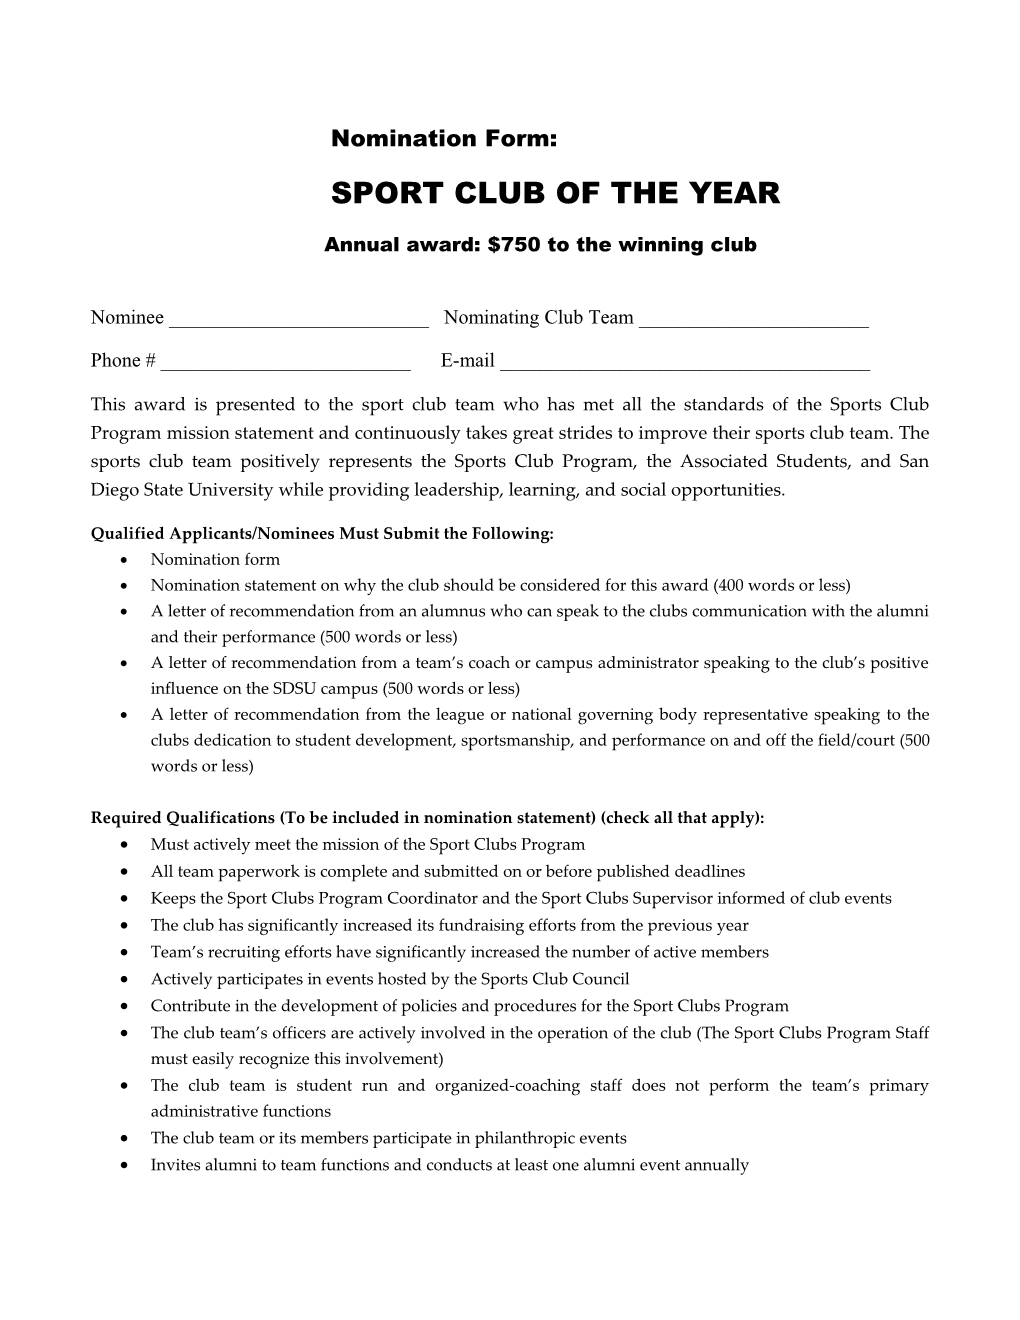 Sport Club of the Year